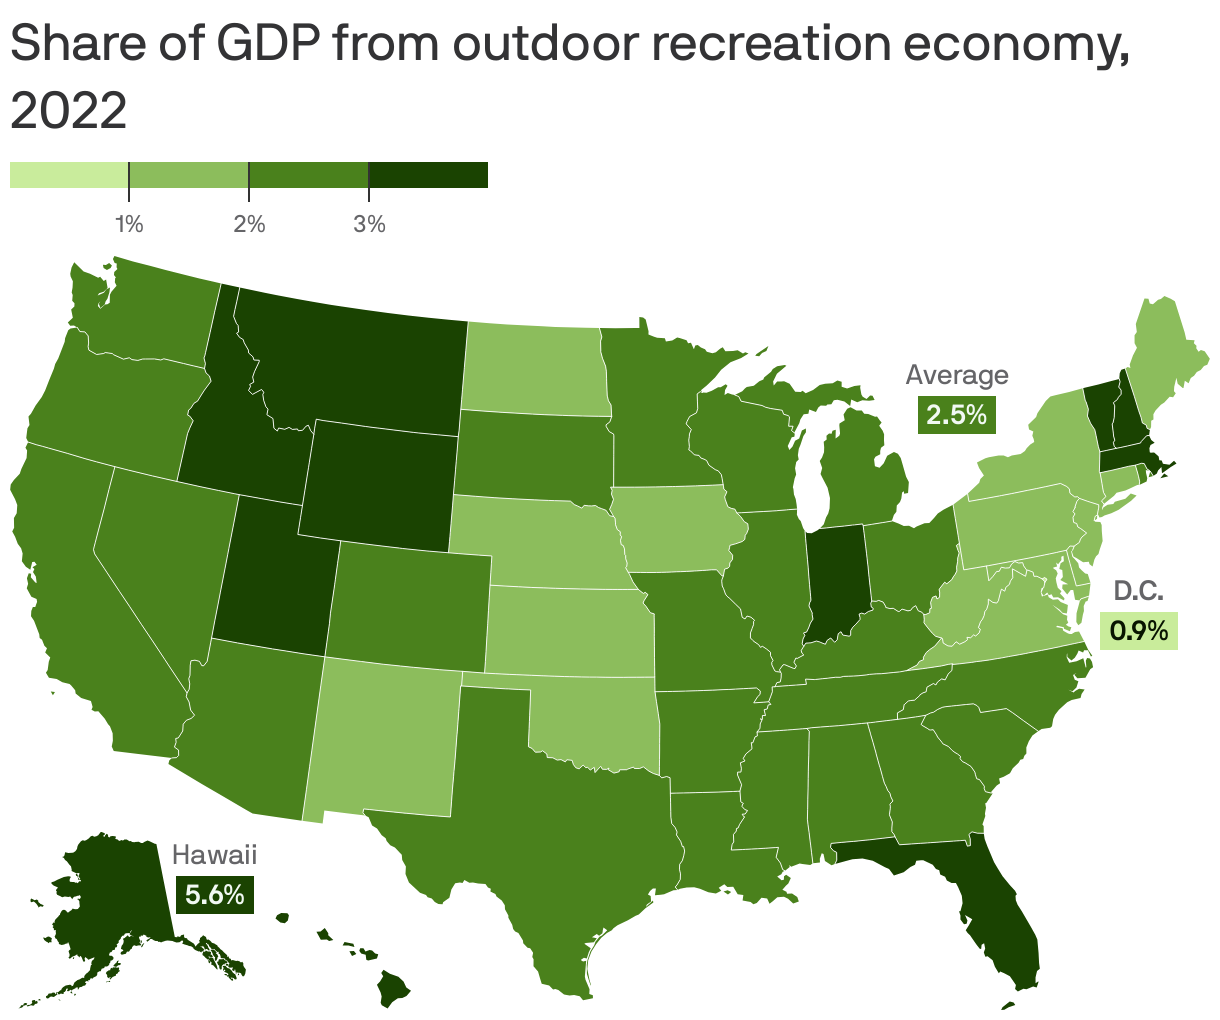 Share of GDP from outdoor recreation economy, 2022